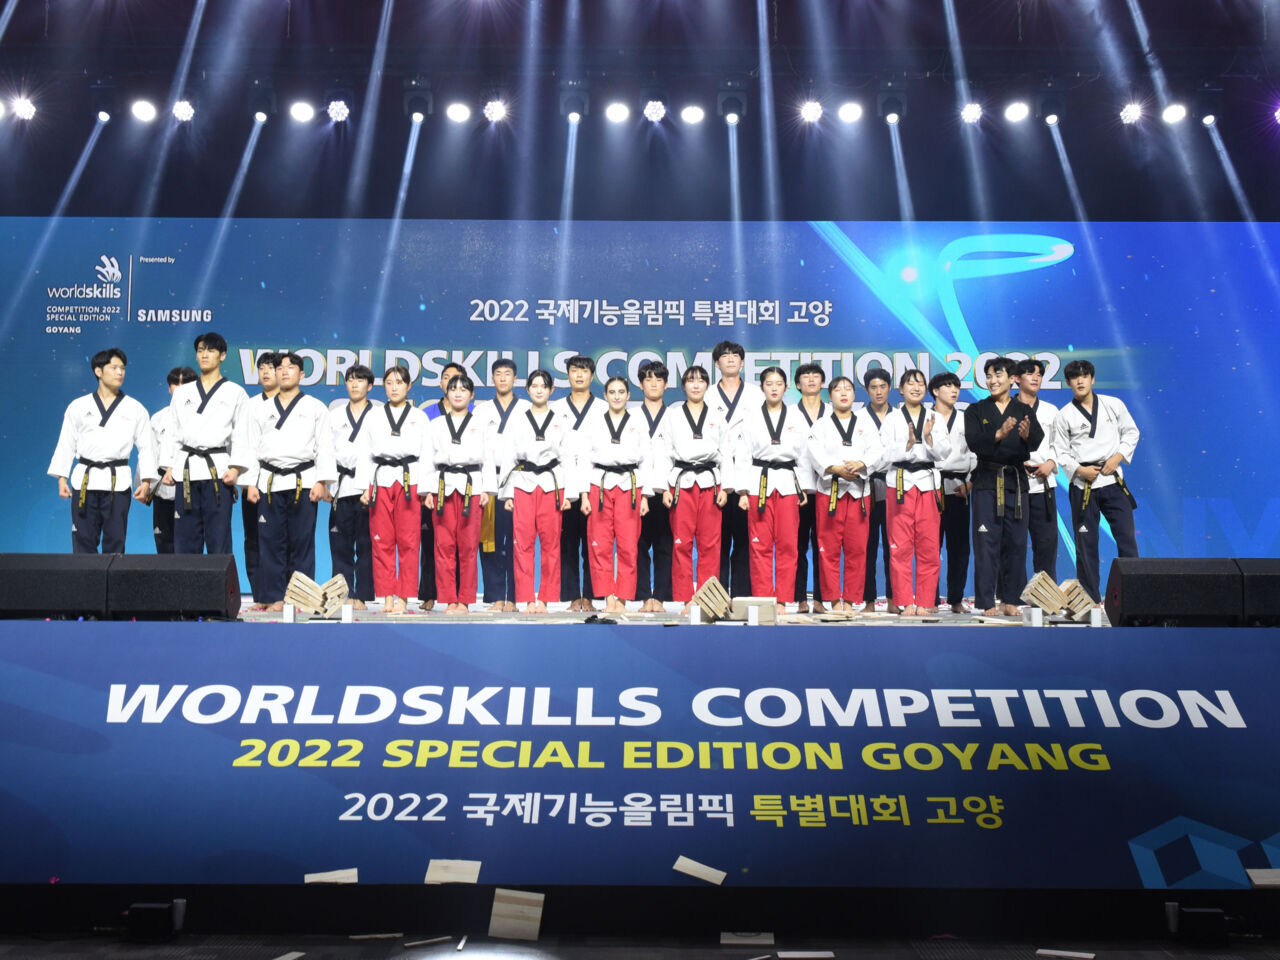 Skill competitions in Korea reflect new technologies and industries